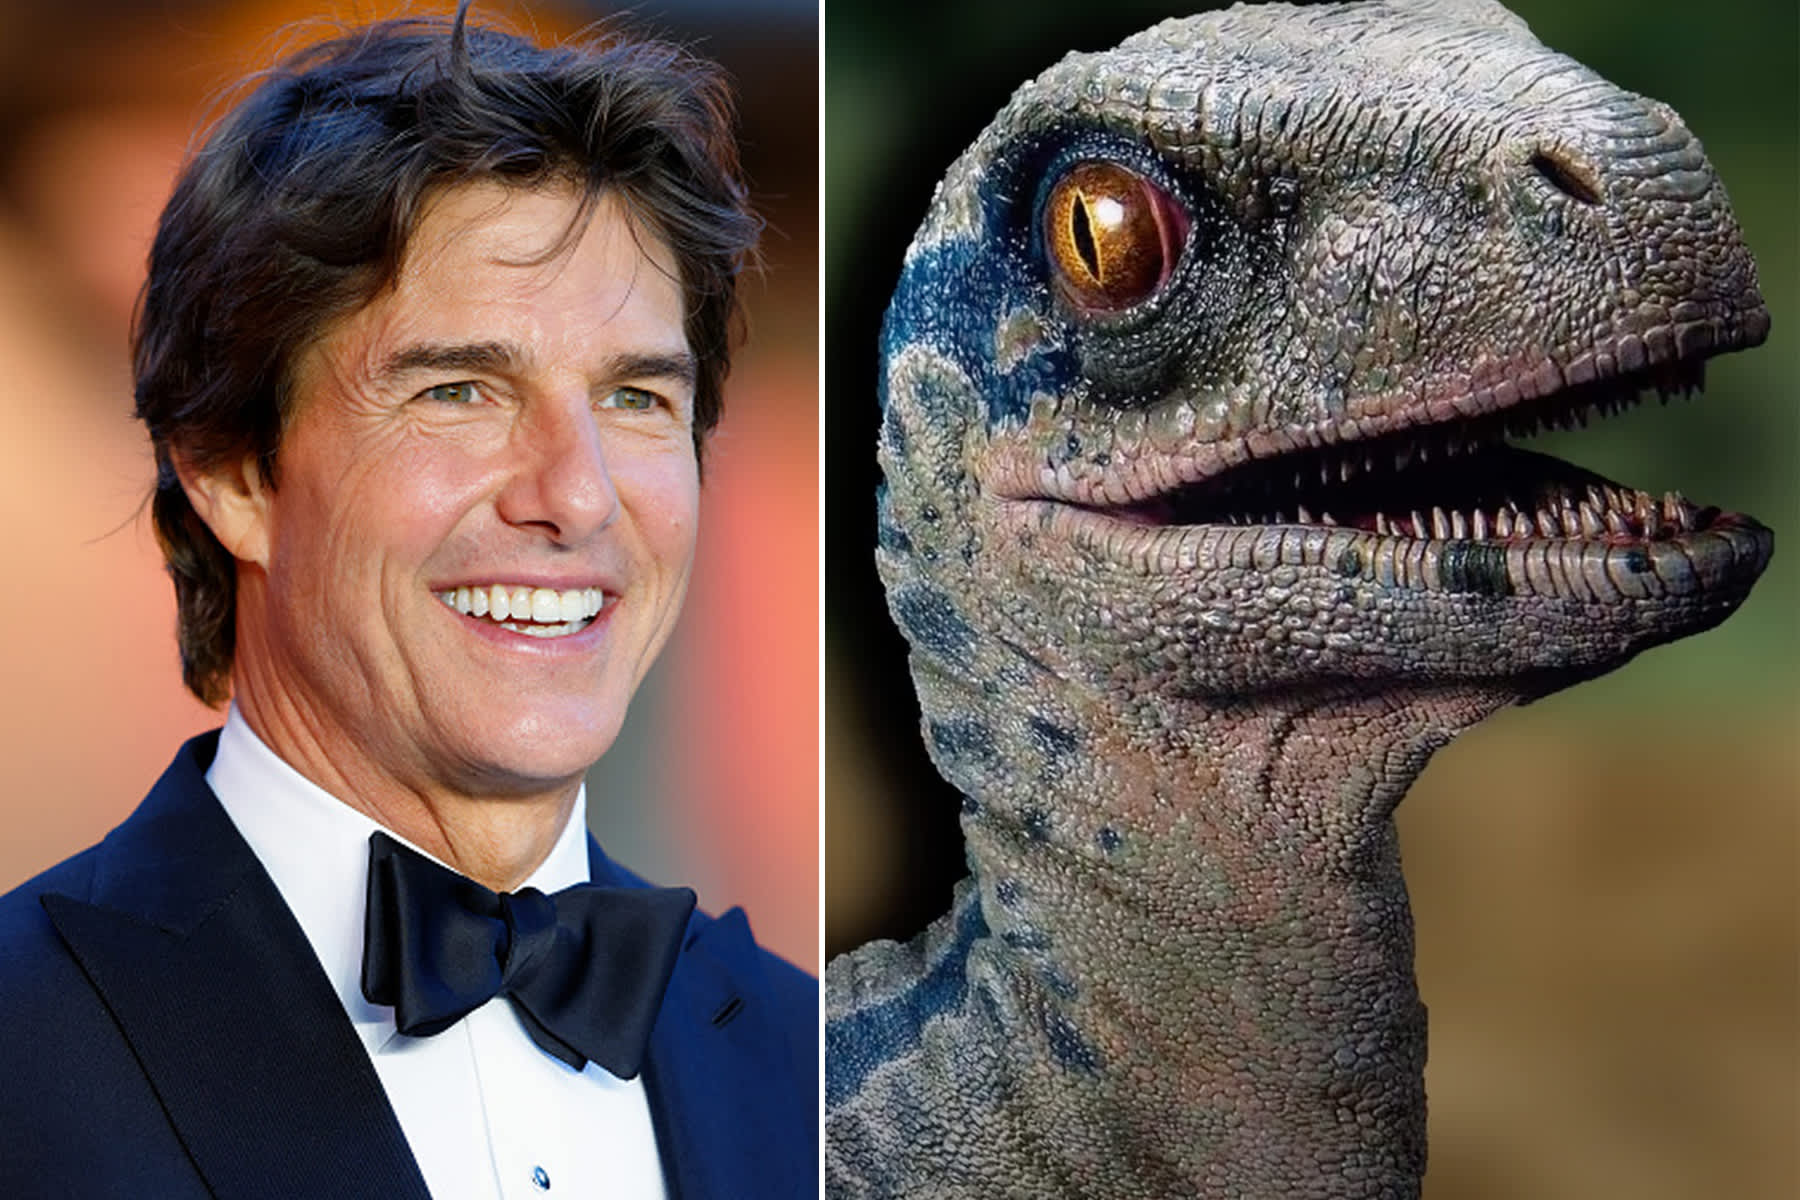 Jurassic World: Dominion box office: Dinosaurs face off against Tom Cruise